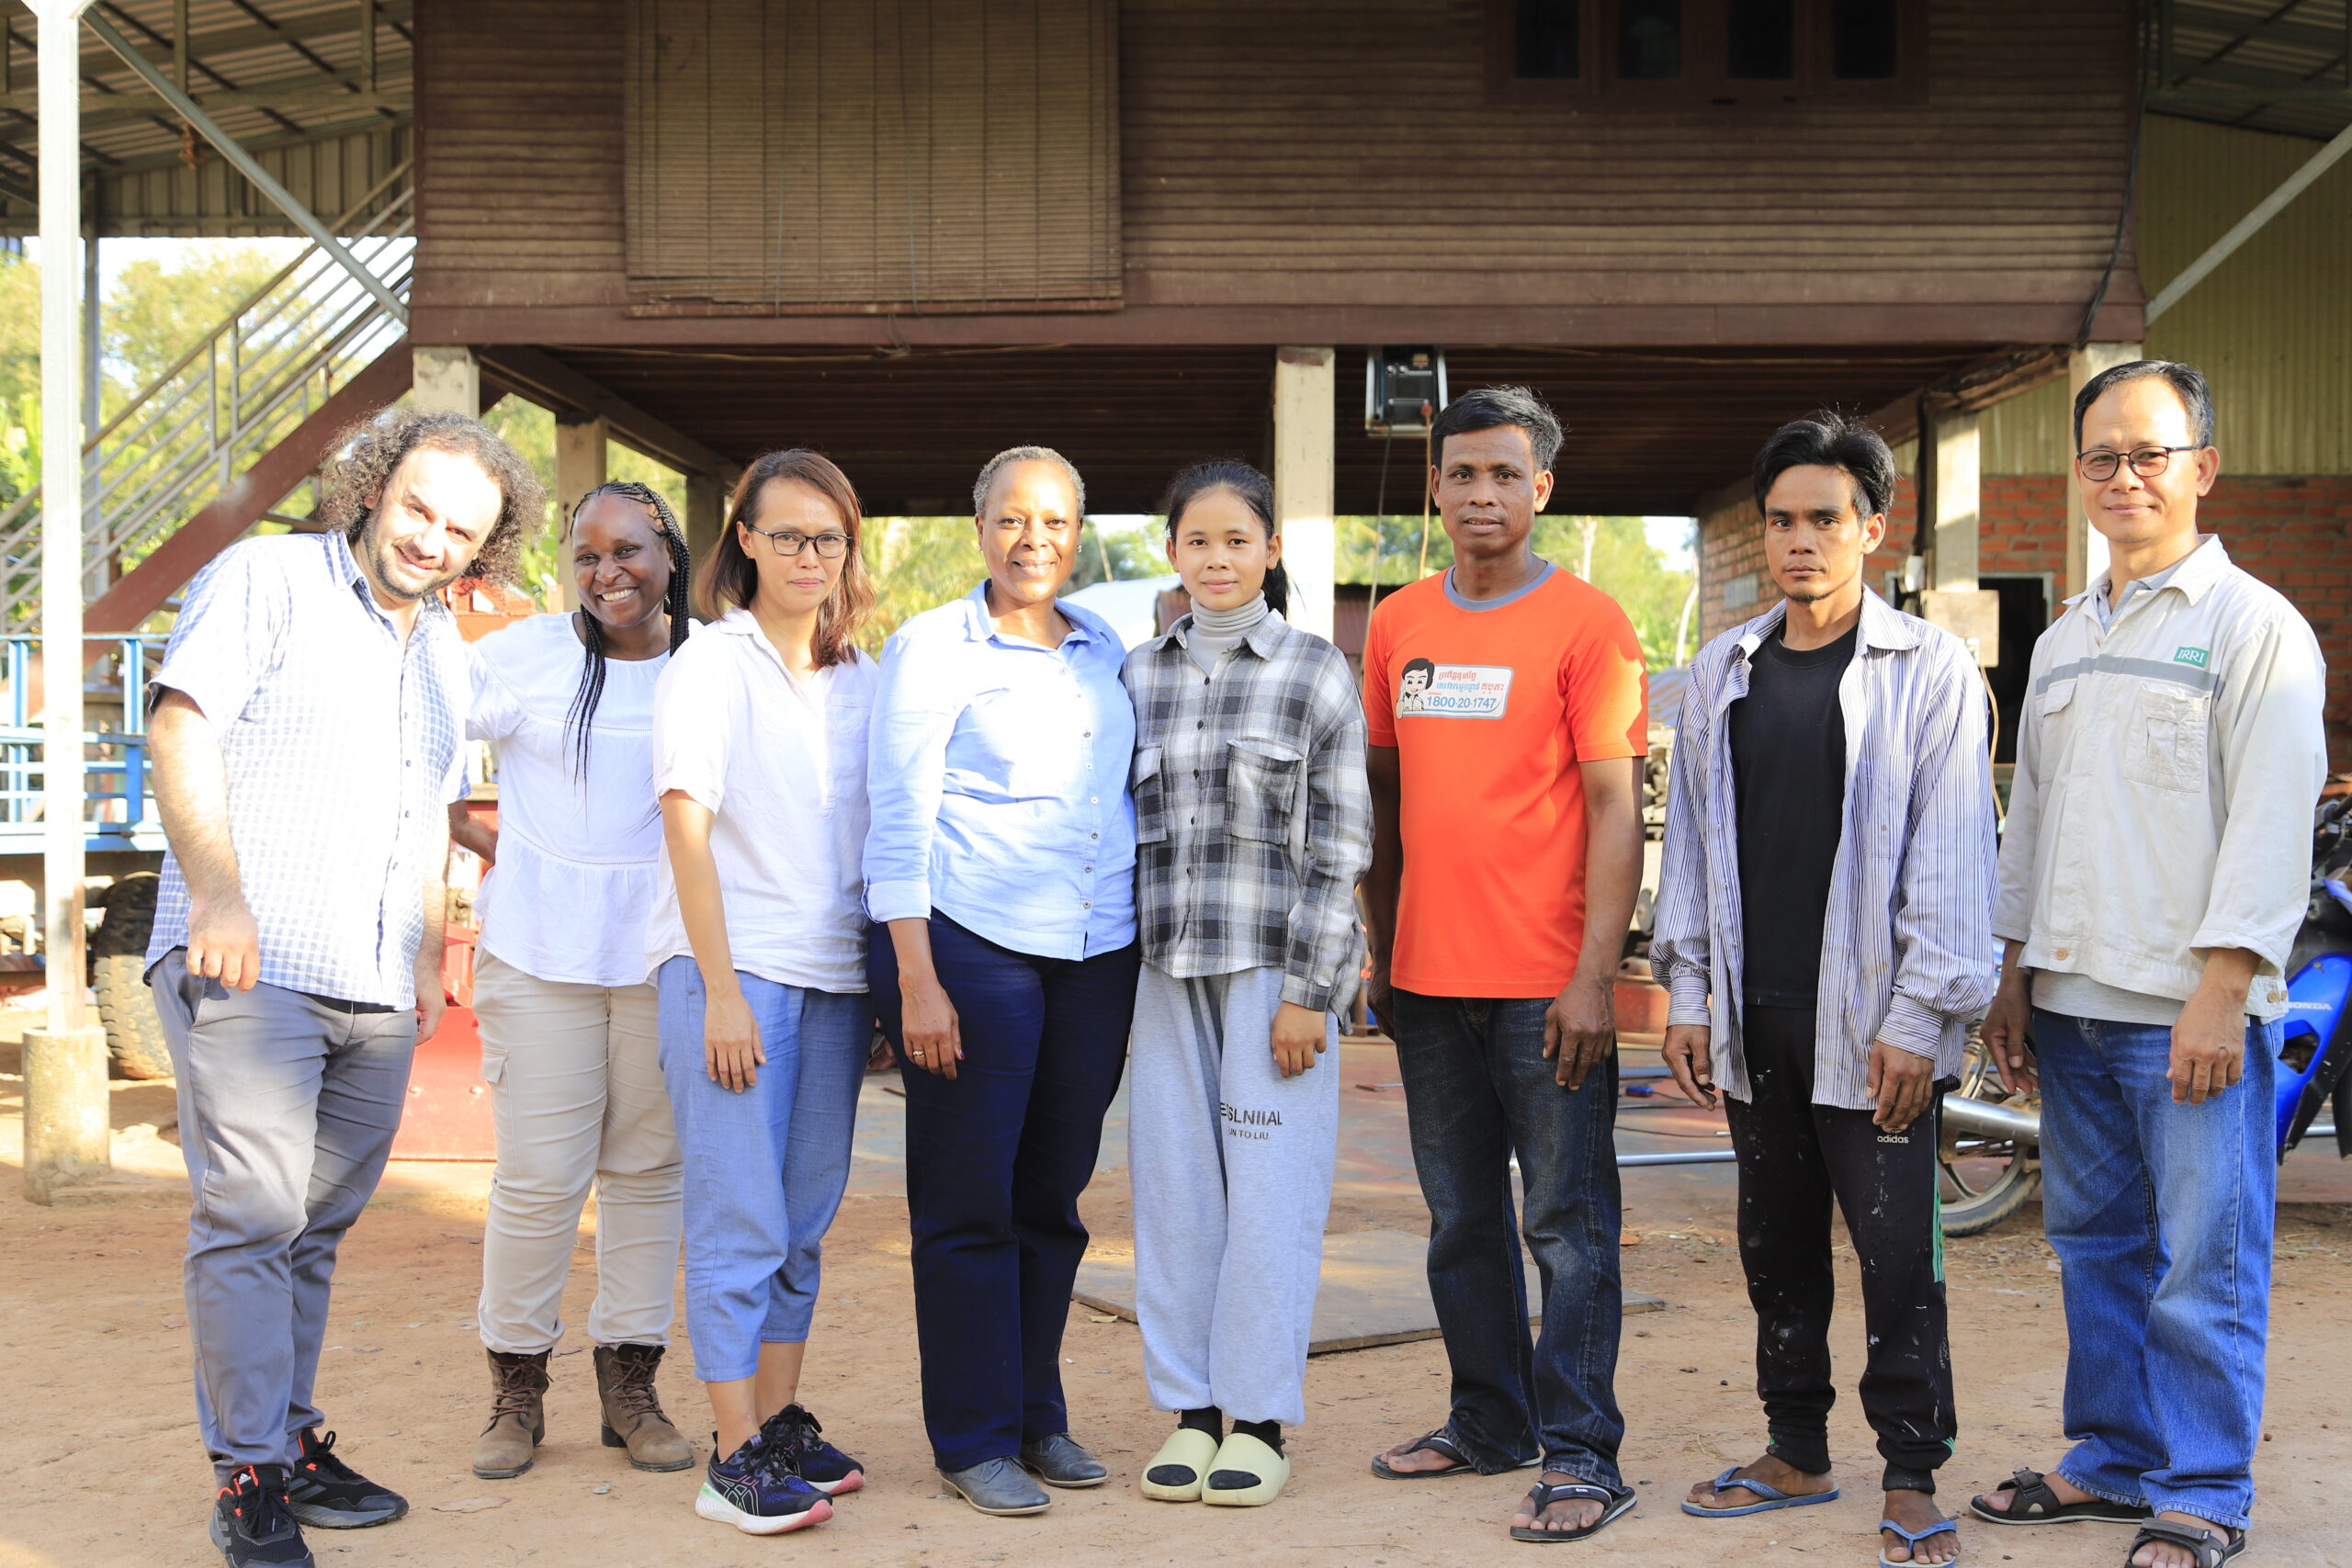 Wanjiku and the Excellence in Excellence in Agronomy team. In the picture: Murat SARTAS (Ph.D.), Wanjiku Guchu, Rica Flor, Barbra Sehlule Muzata, and rathmuny alongside Mr Lun Heng, a Cambodian farmer and his family.